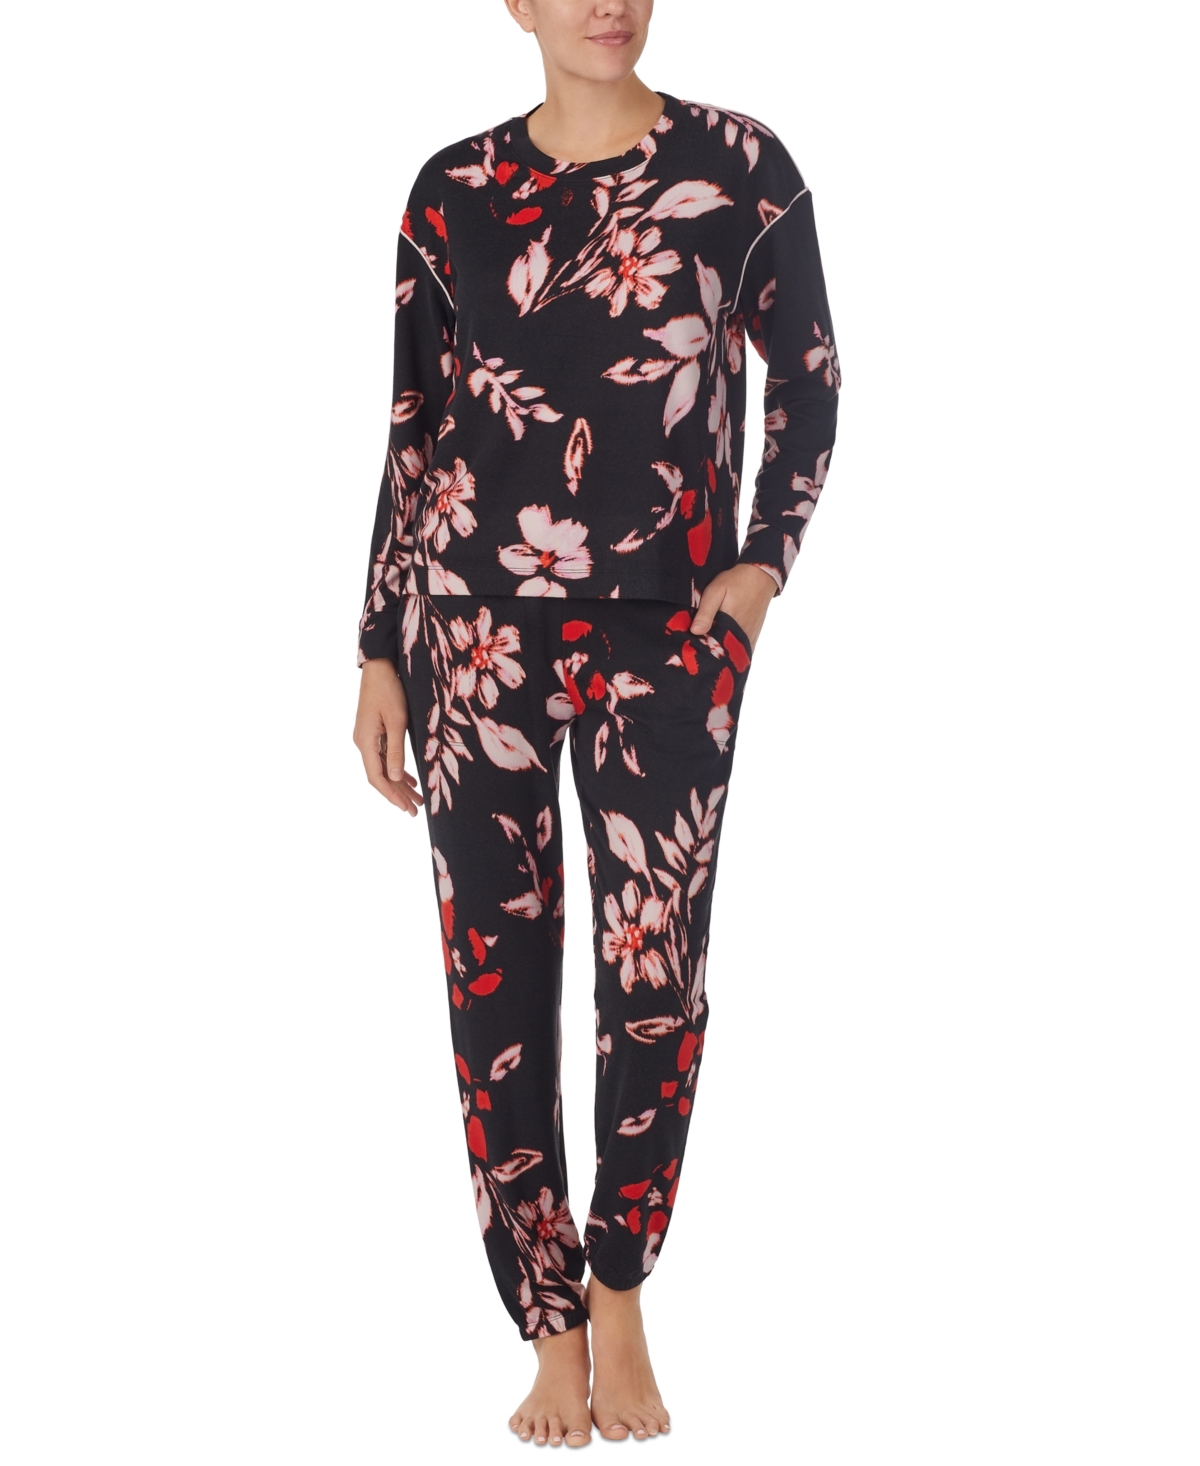 Sanctuary Woman's 2-pc. Long-sleeve Jogger Pajamas Set In Black Ground Floral